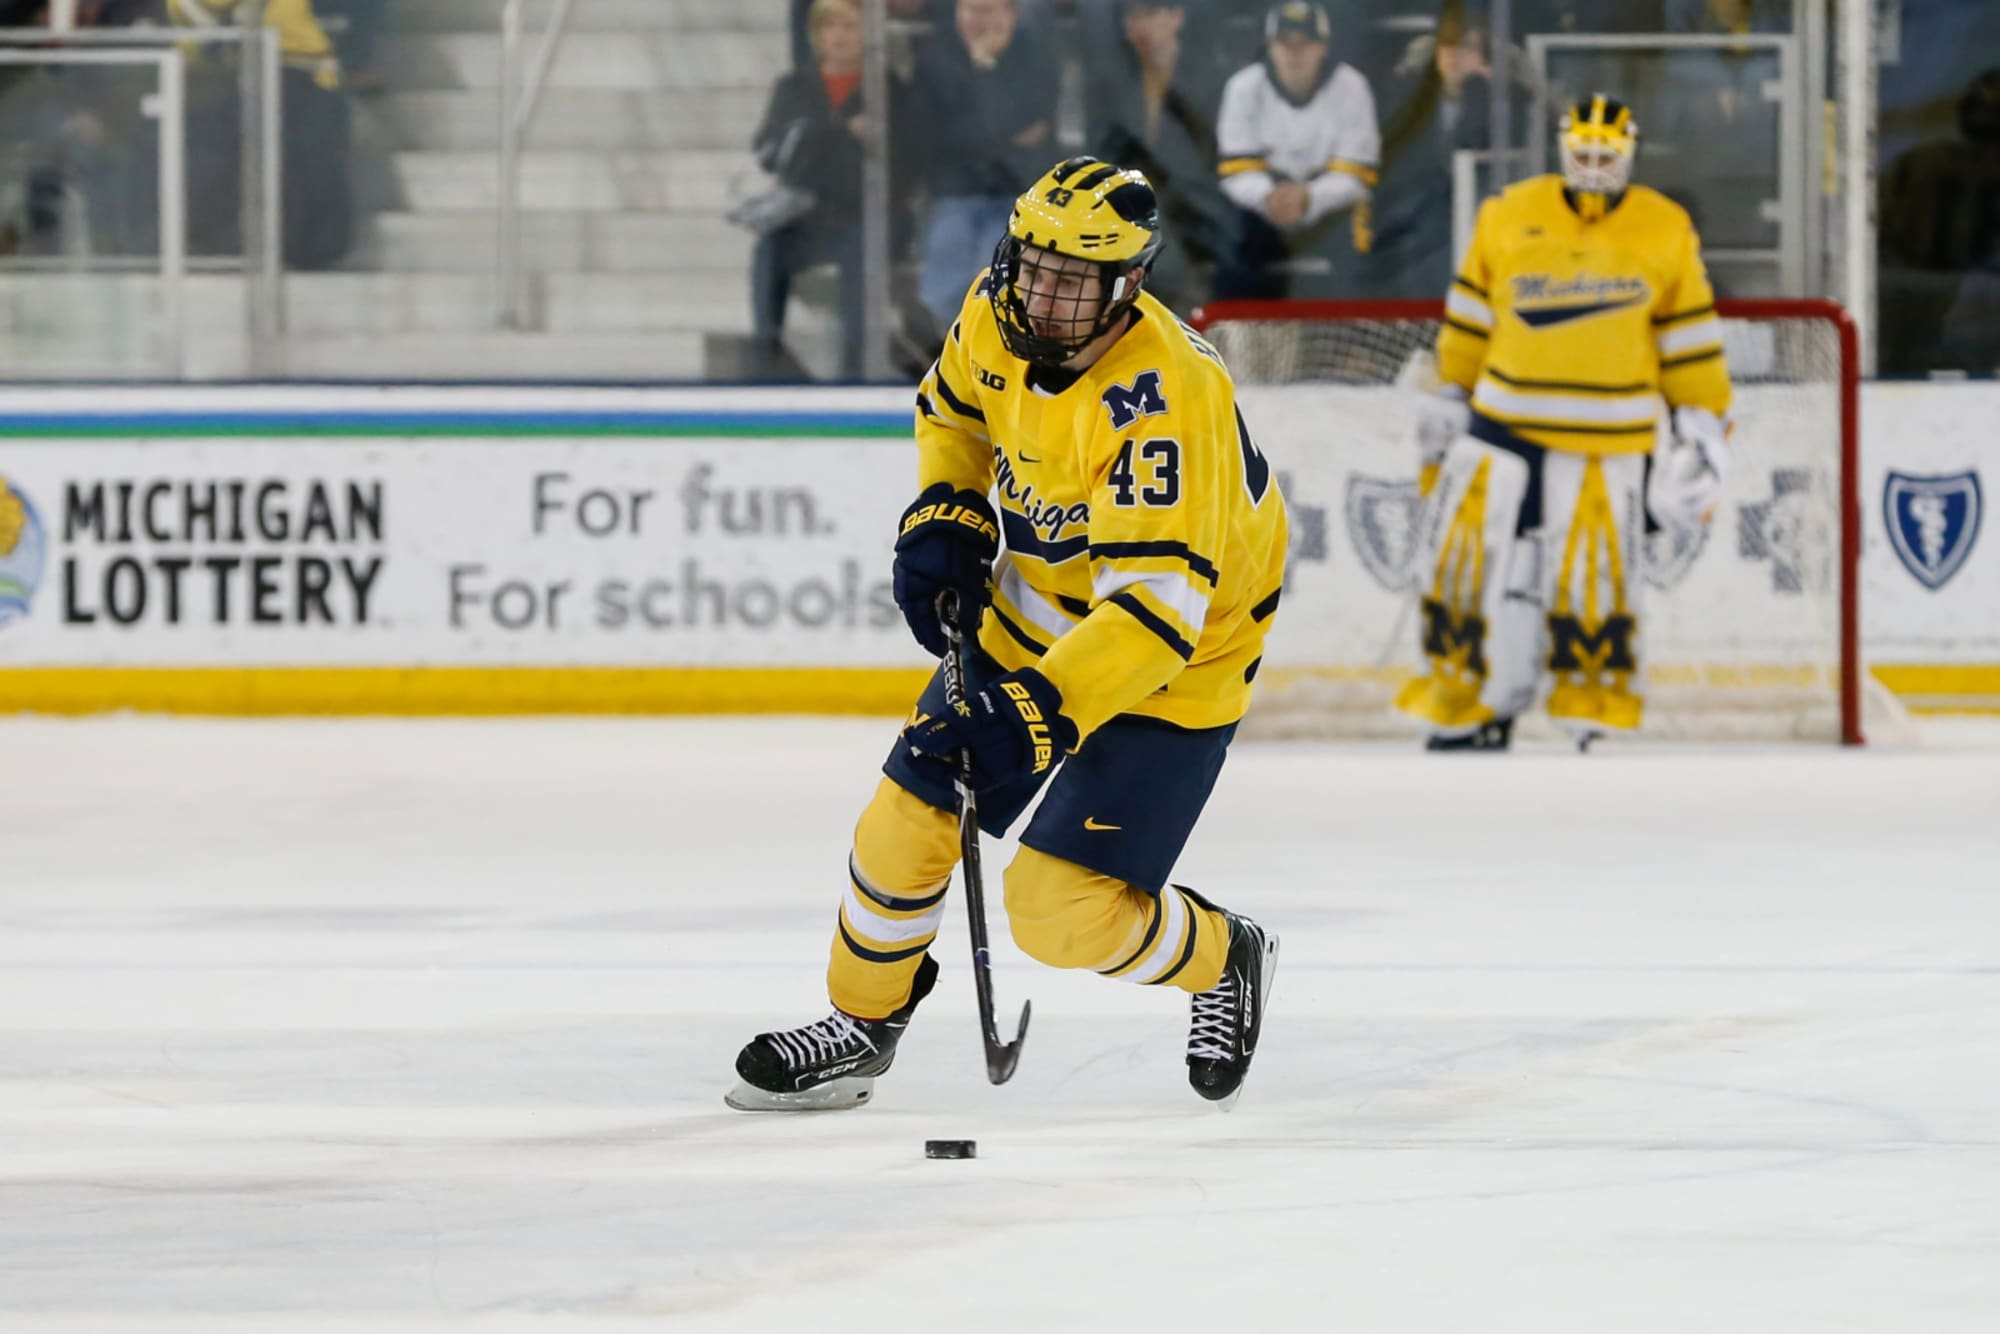 NHL draft: Michigan's Quinn Hughes drafted by Vancouver